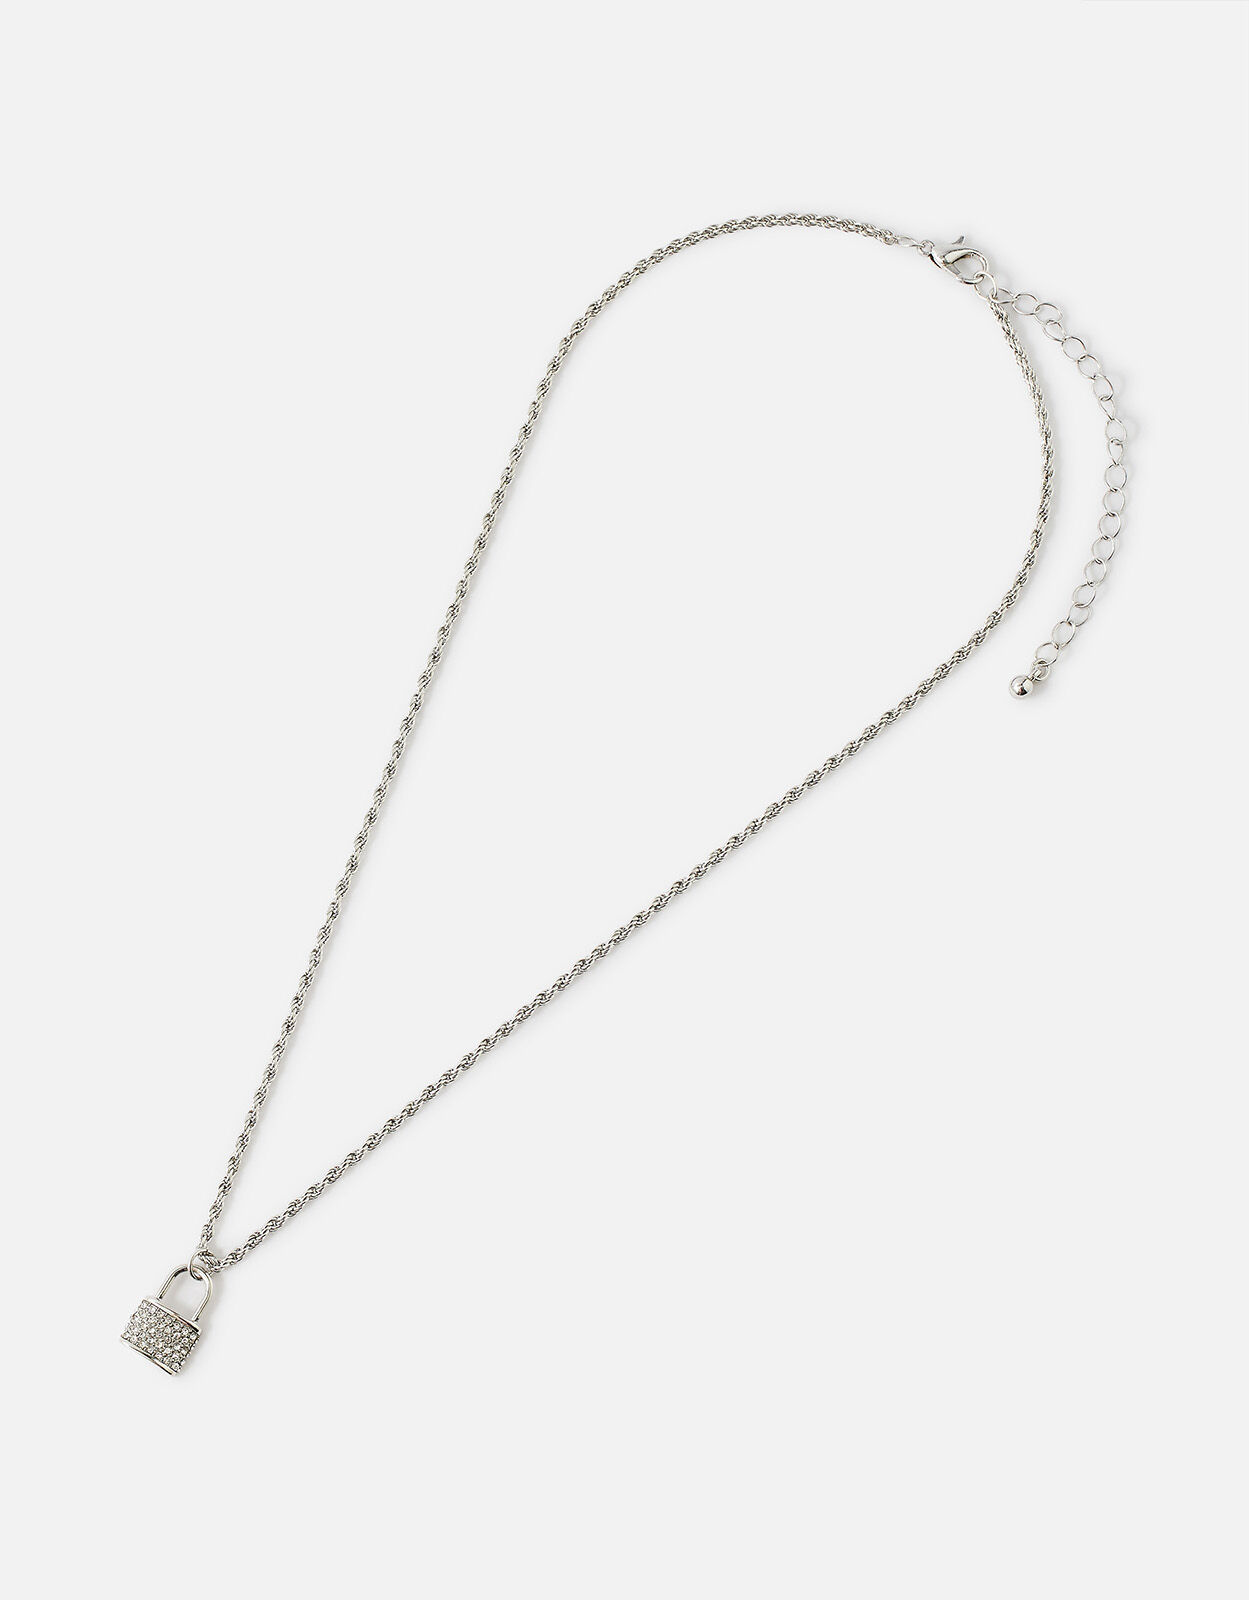 Accessorize Accessorize Clear & Grey Gem Silver Y Shaped Necklace 